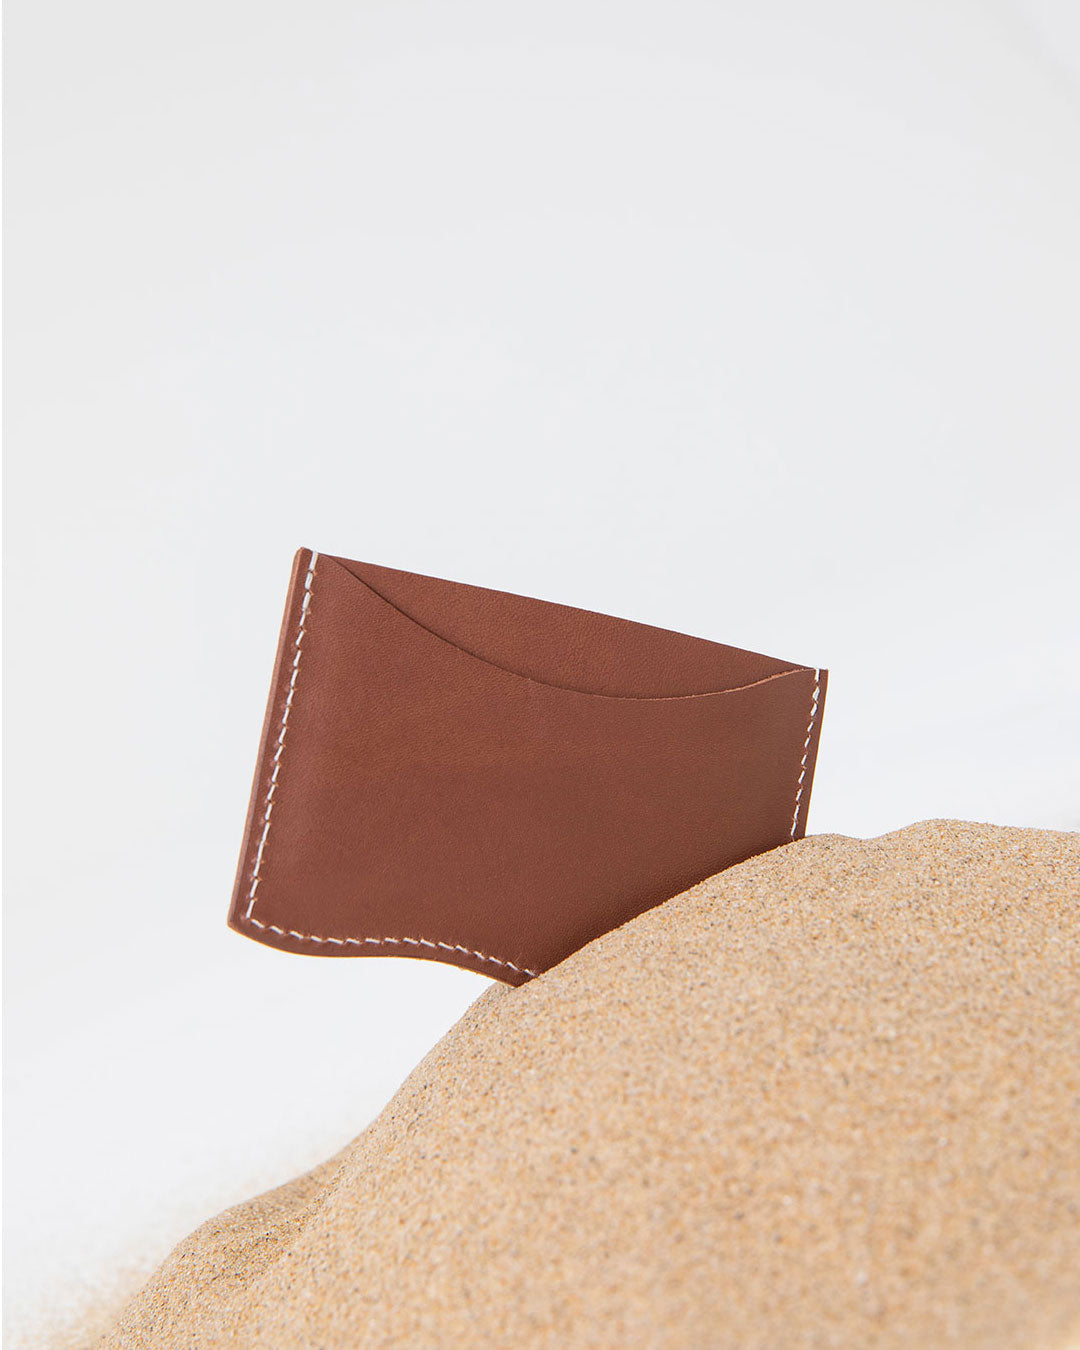 pisces card wallet / red rock